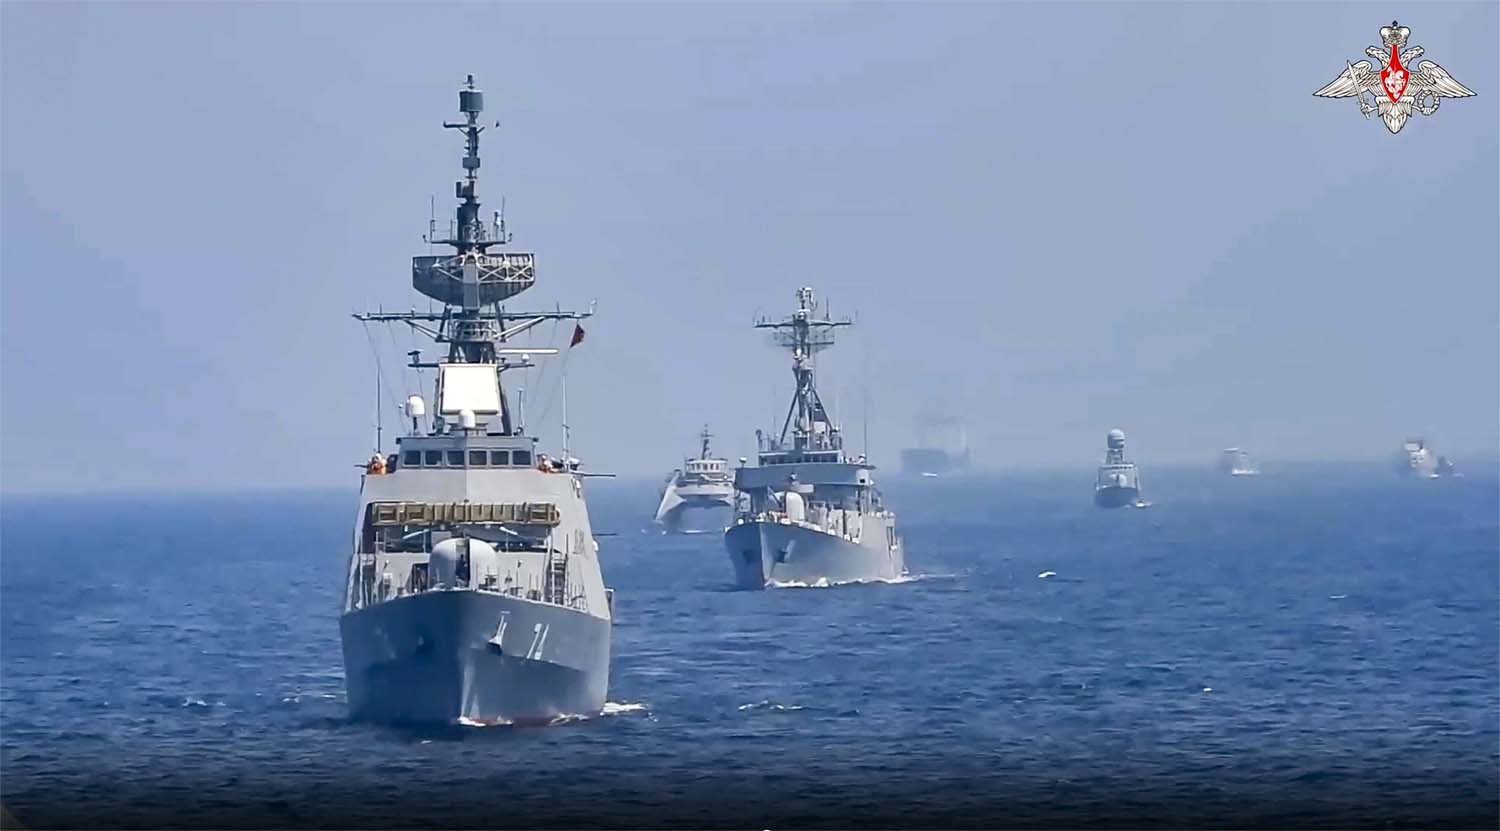 12 ships took part in the drills from March 15 to 19